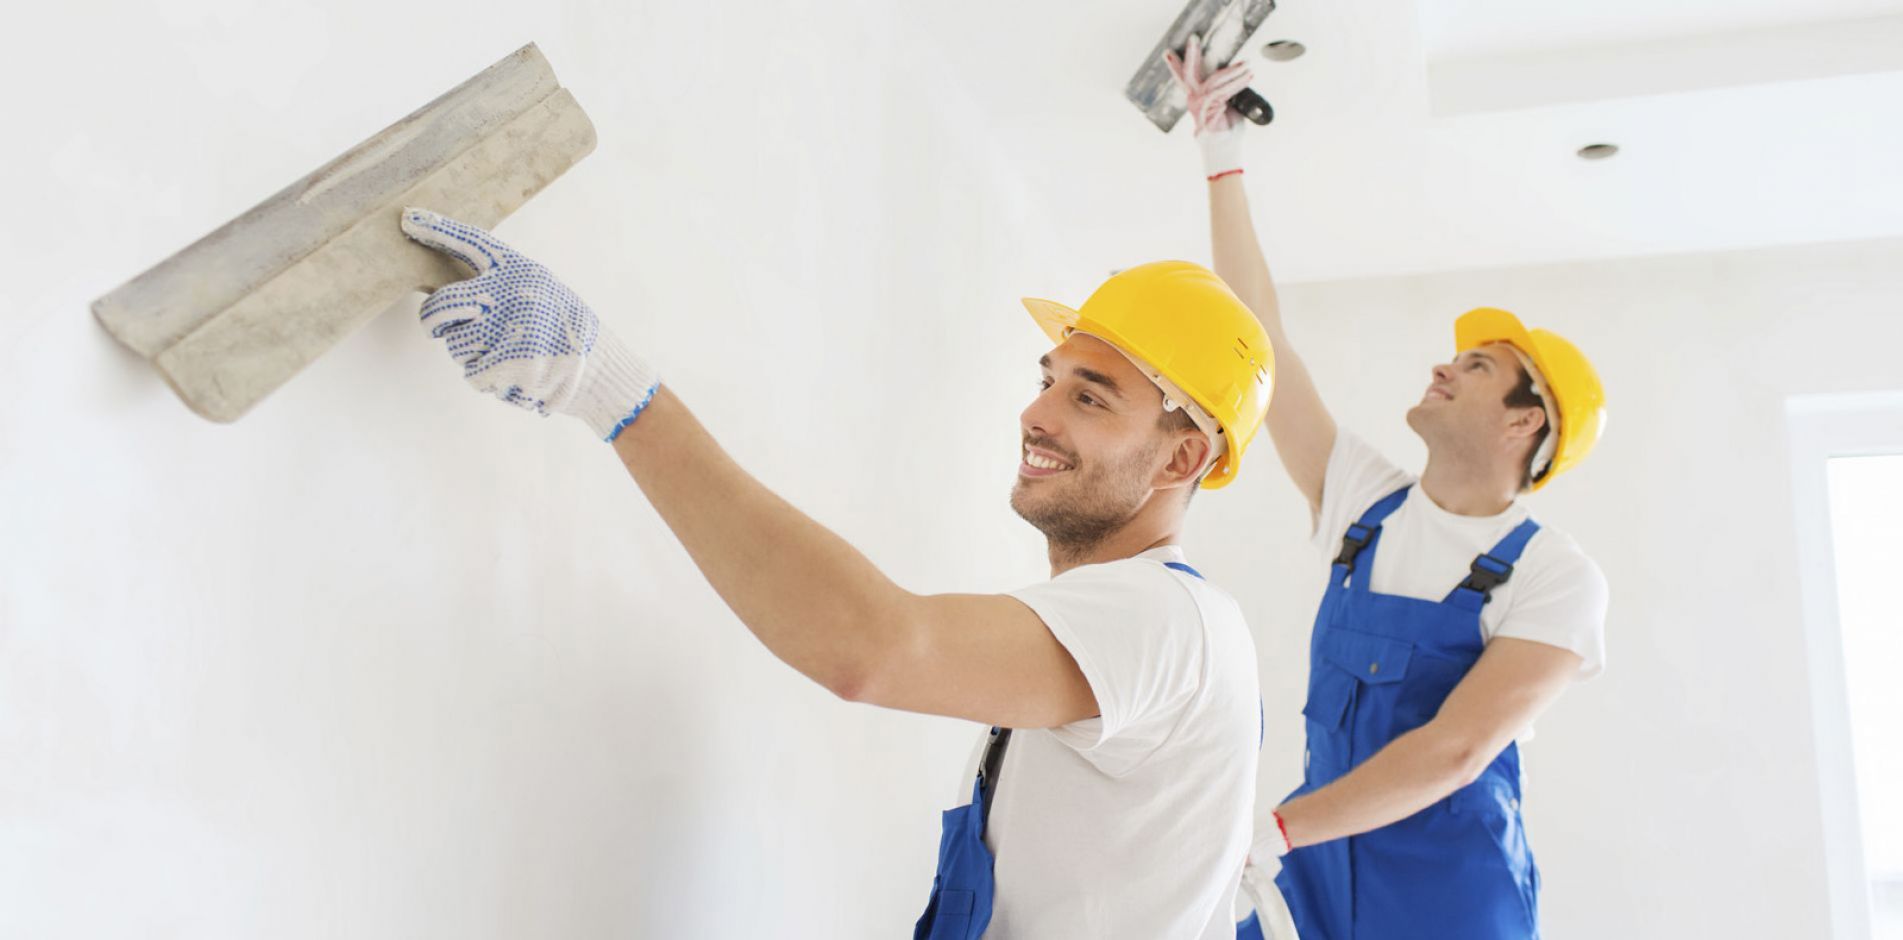 speed up your renovation works